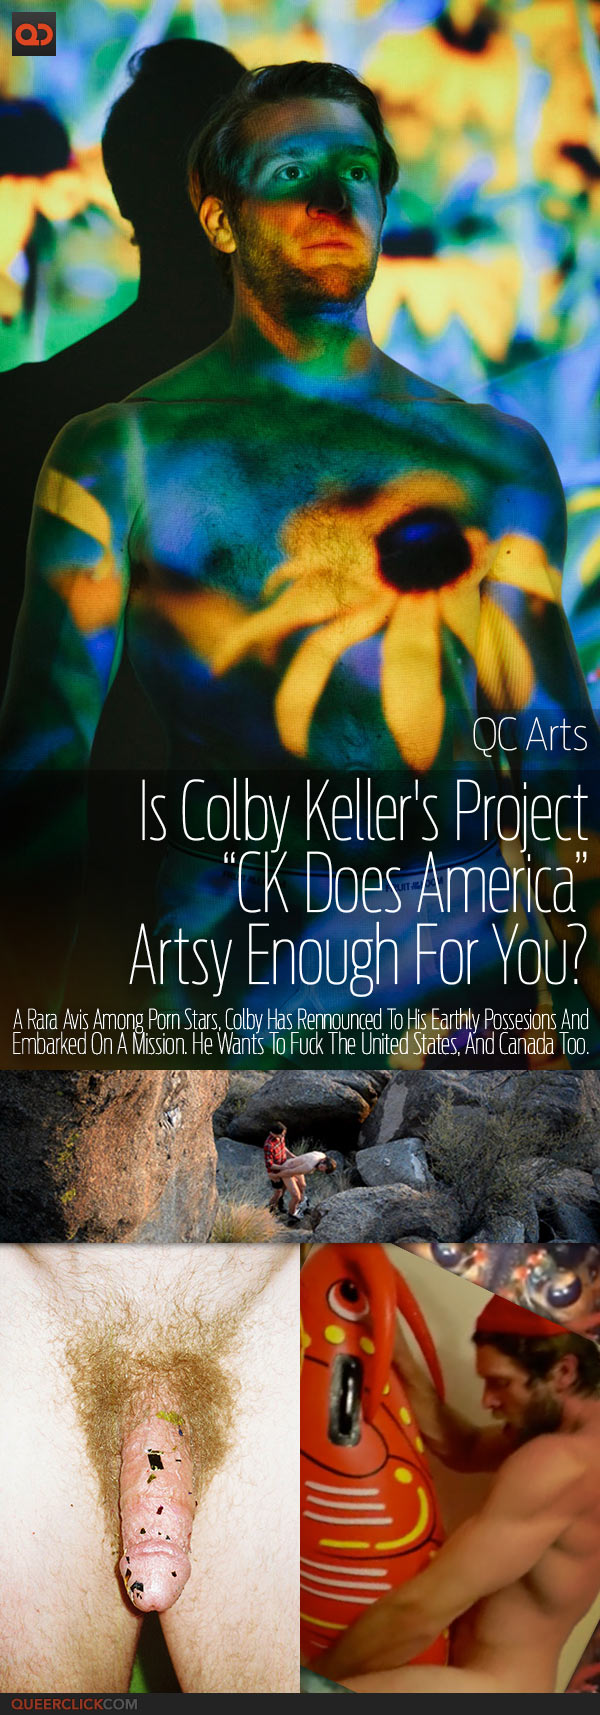 QC Arts: Is Colby Keller's Project “CK Does America” Artsy Enough For You?